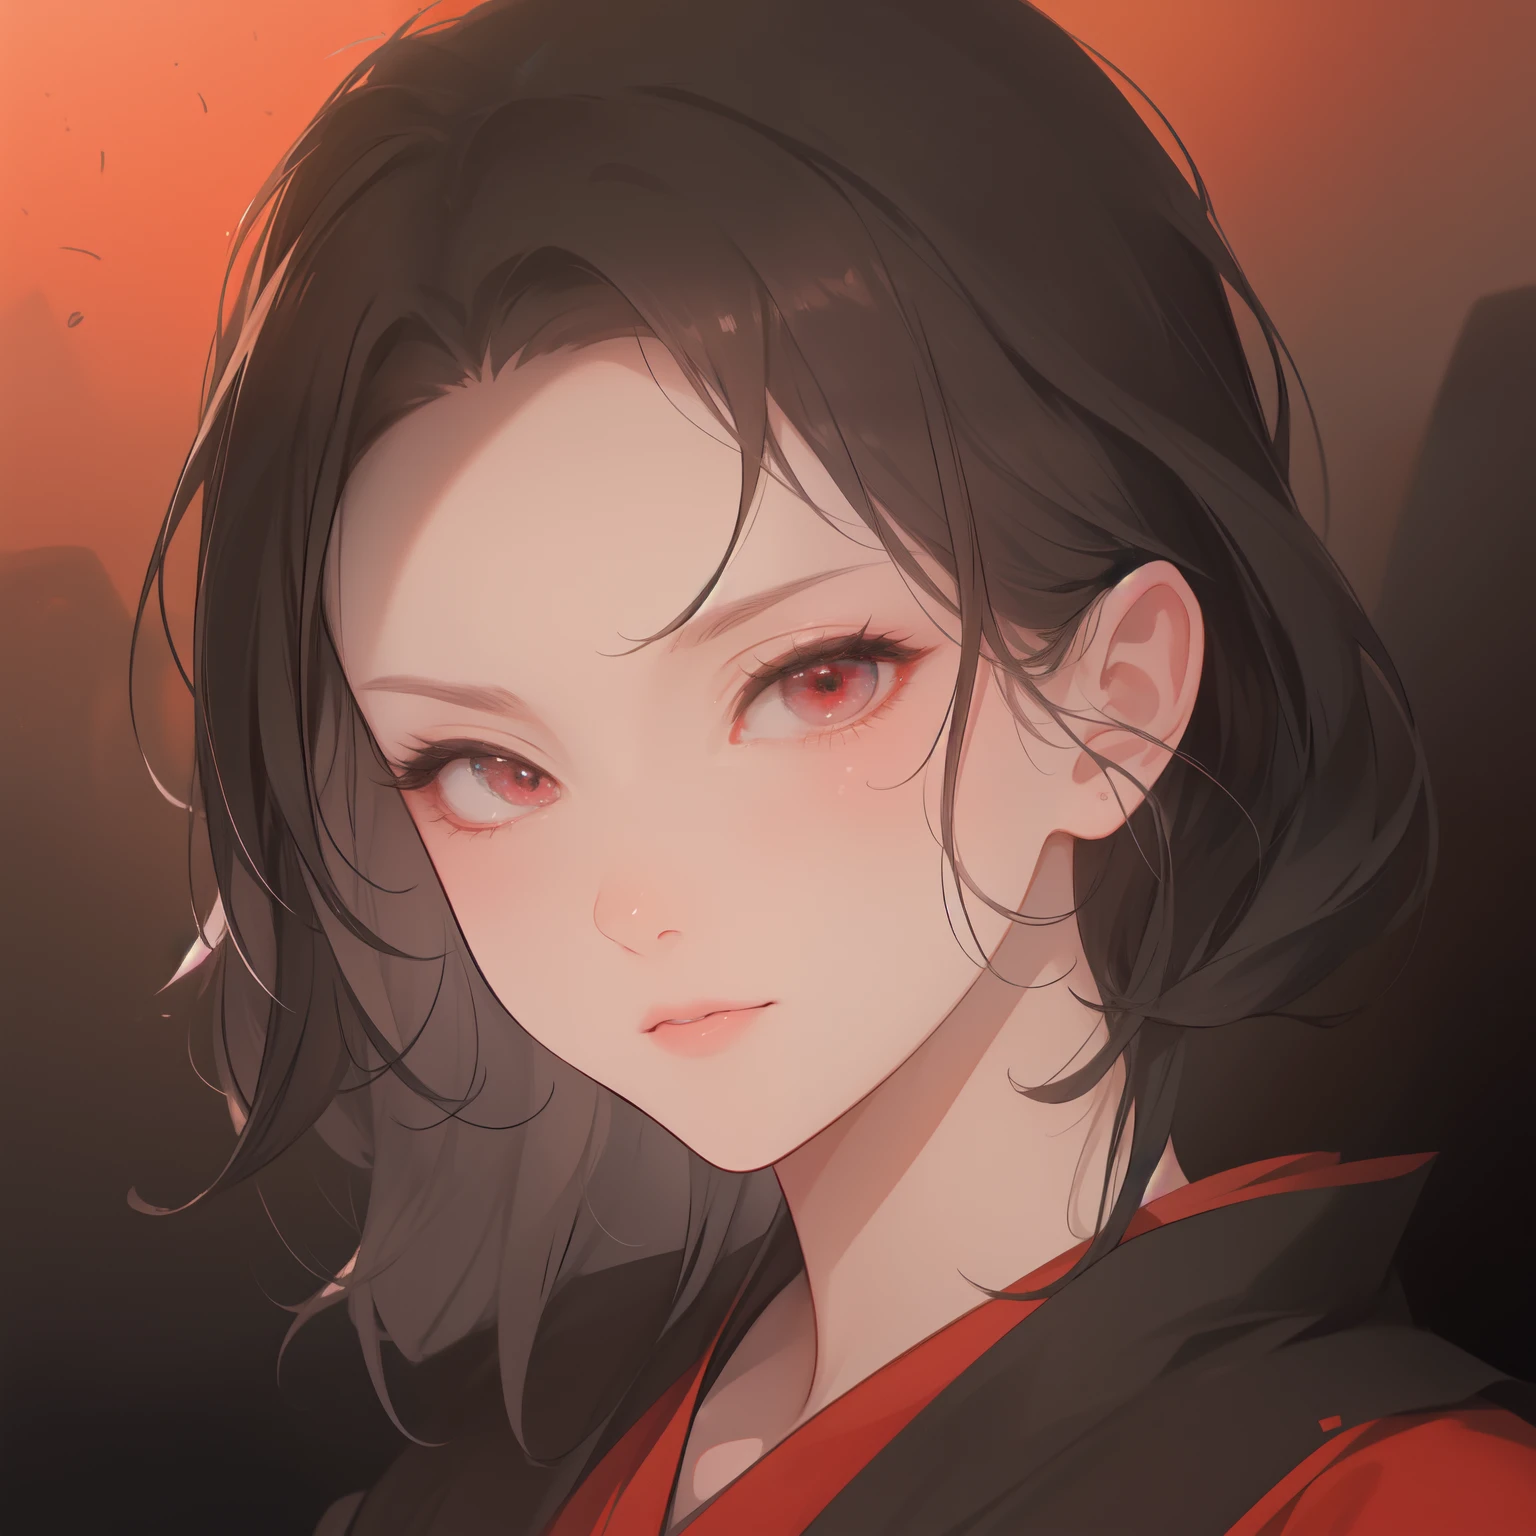 a close up of muzan kibutsuji (Genderbender) with a red shirt and black hair, anime style 4 k, stunning anime face portrait, beautiful anime portrait, anime style. 8k, anime art wallpaper 4k, anime art wallpaper 4 k, anime art wallpaper 8 k, anime style portrait, portrait anime girl, beautiful anime face, digital anime art, anime wallpaper 4k, red eyes, glowing eyes, smile, vampire fangs, detailed iris, cat iris, derailed cat iris, glowing red eyes, Translucent porcelain-like skin